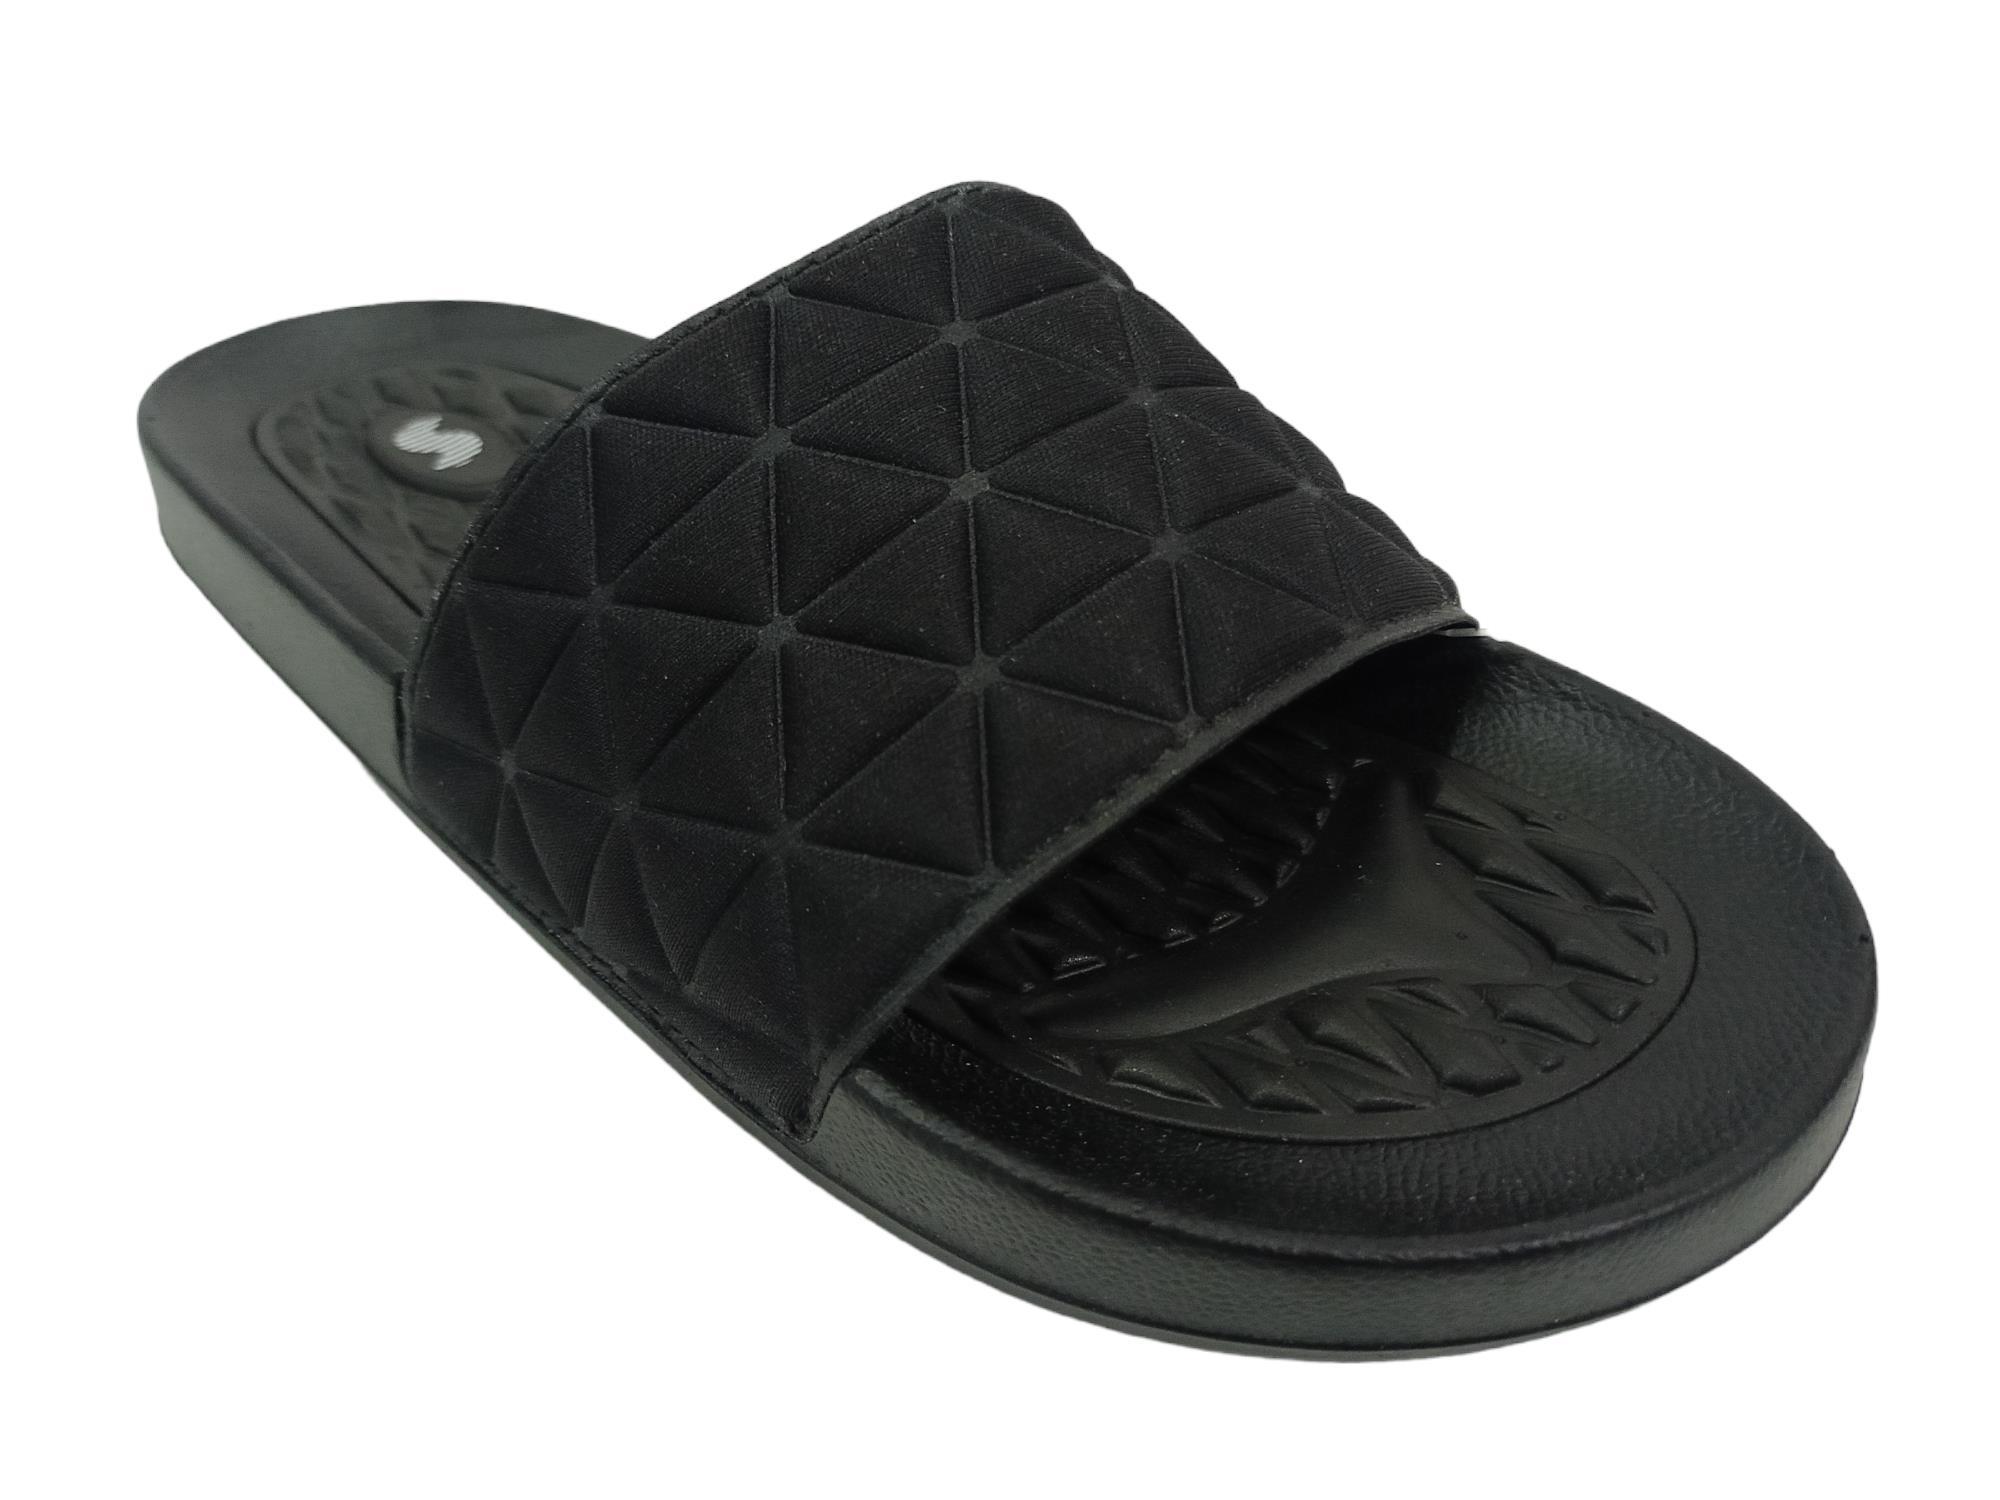 SOLE M Sandals for Women for sale | eBay